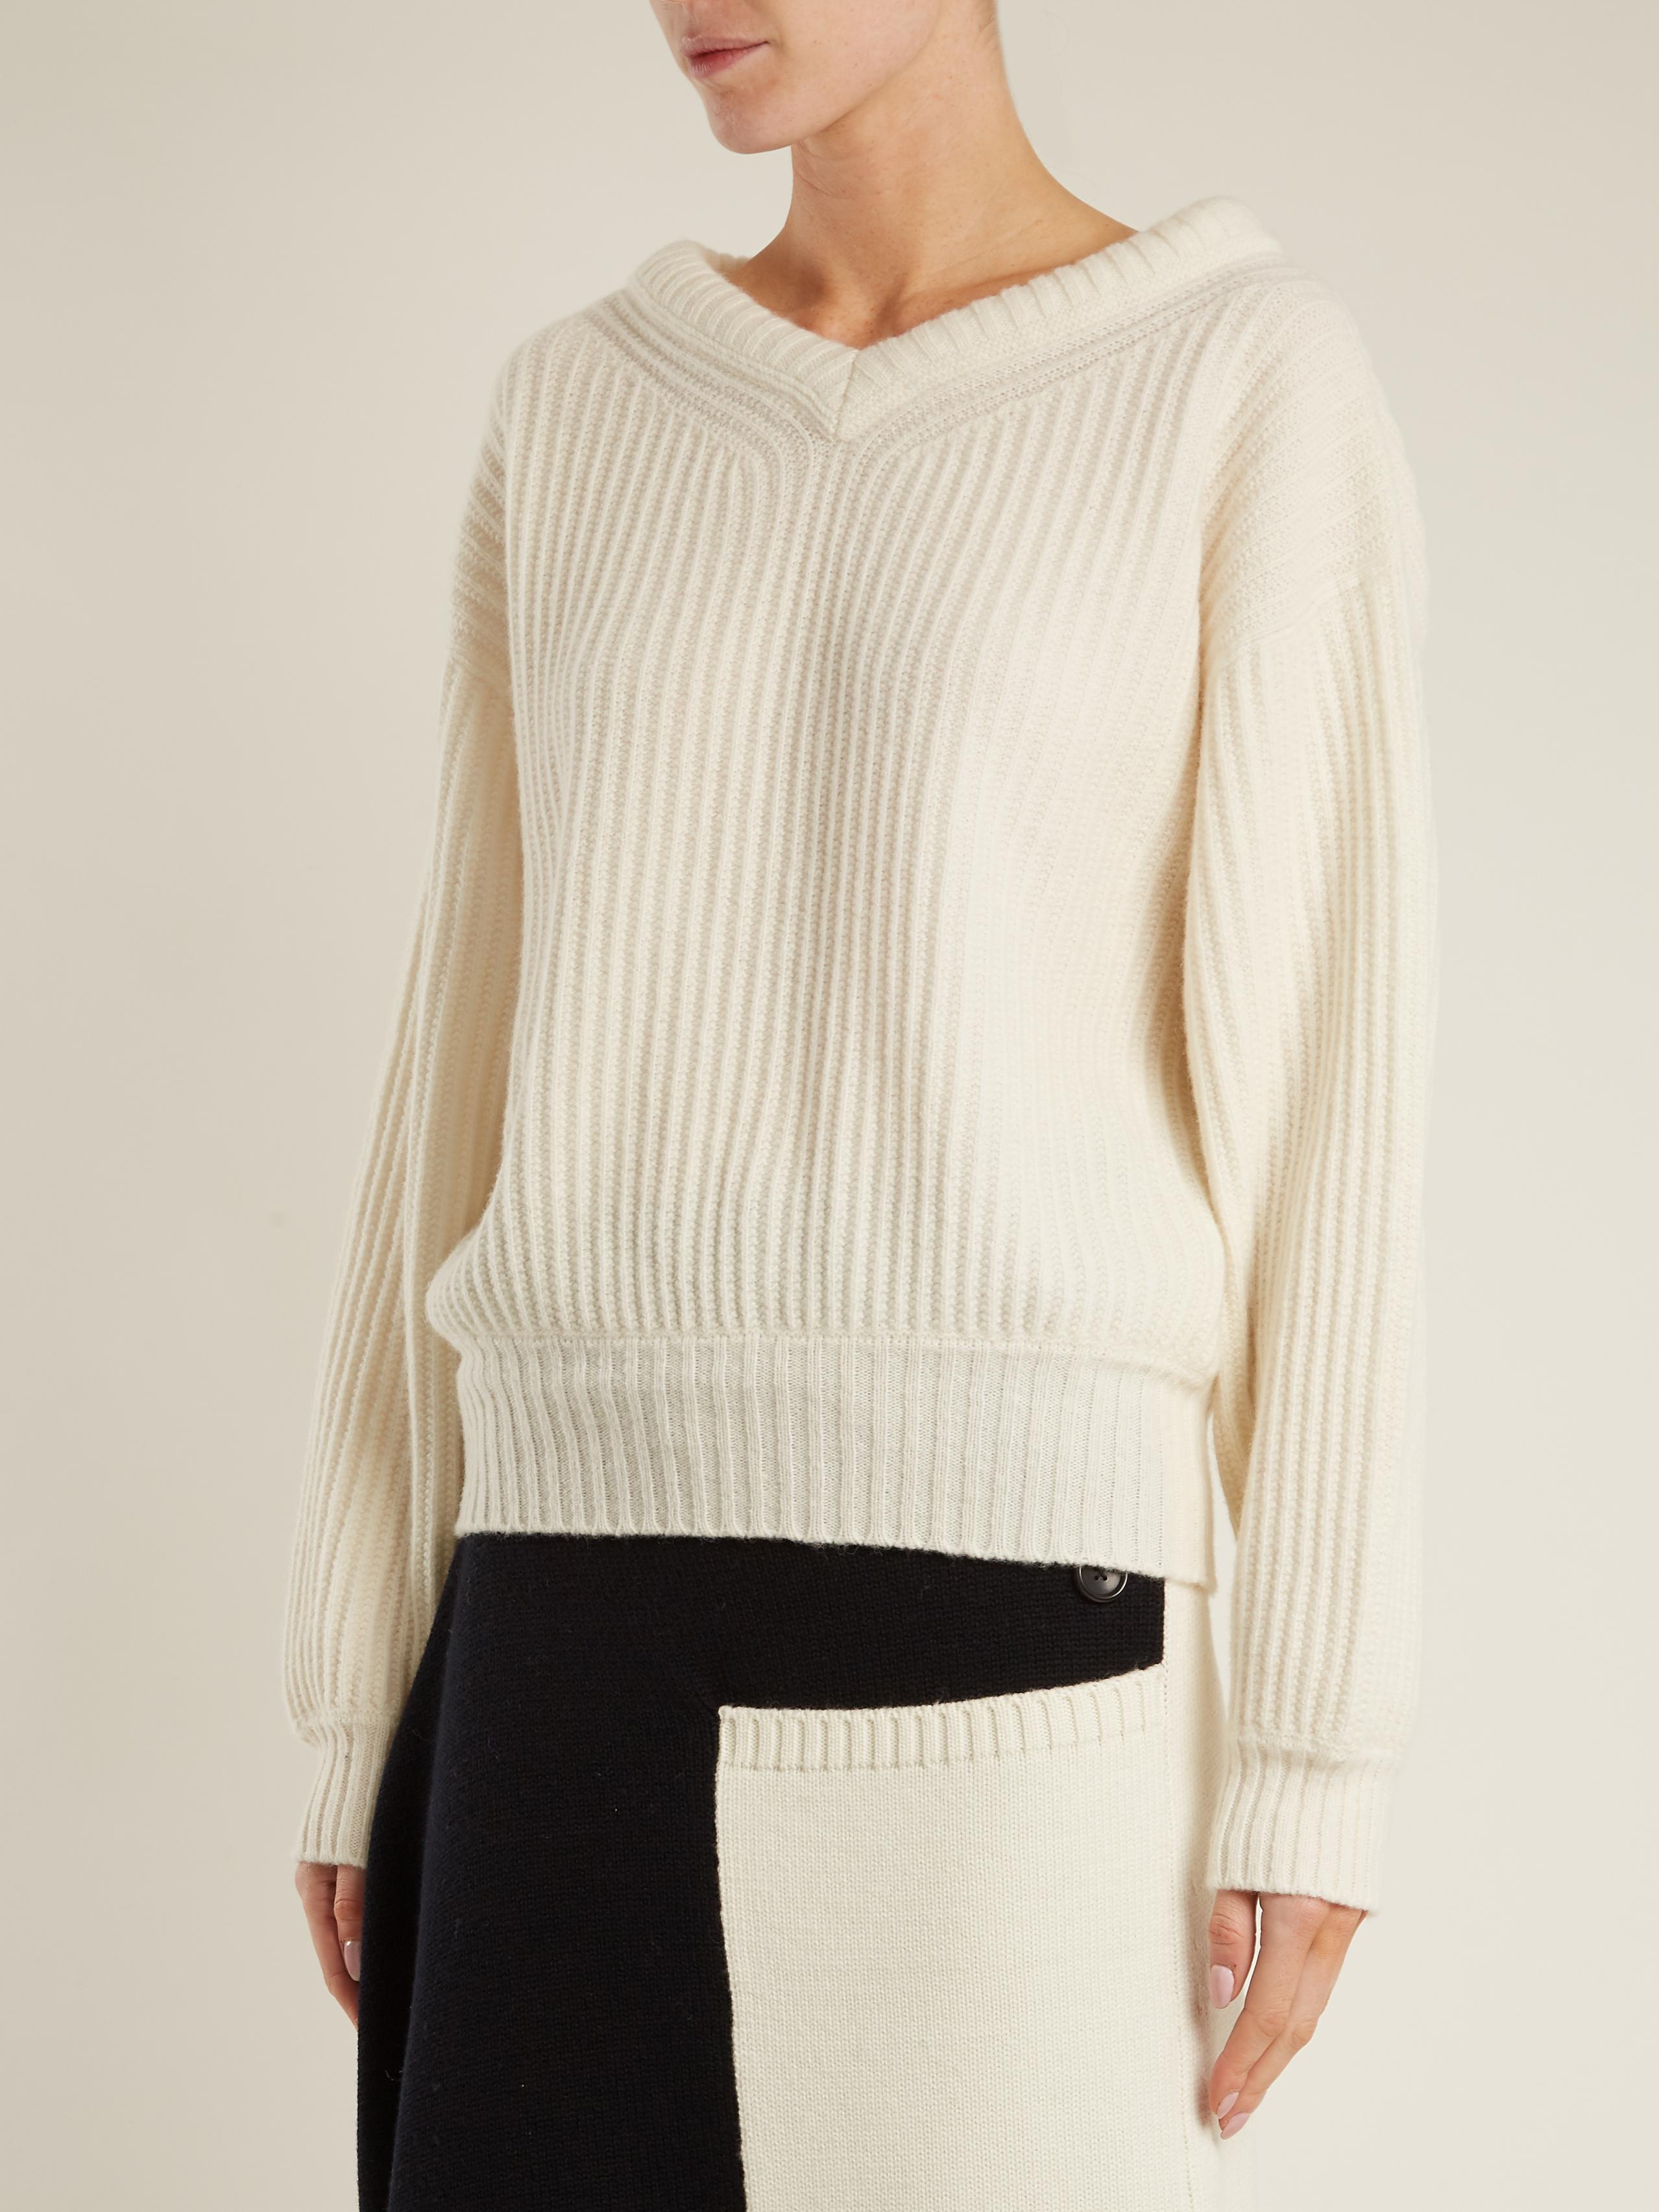 Lyst - Lemaire V-neck Chunky Wool-knit Sweater in White